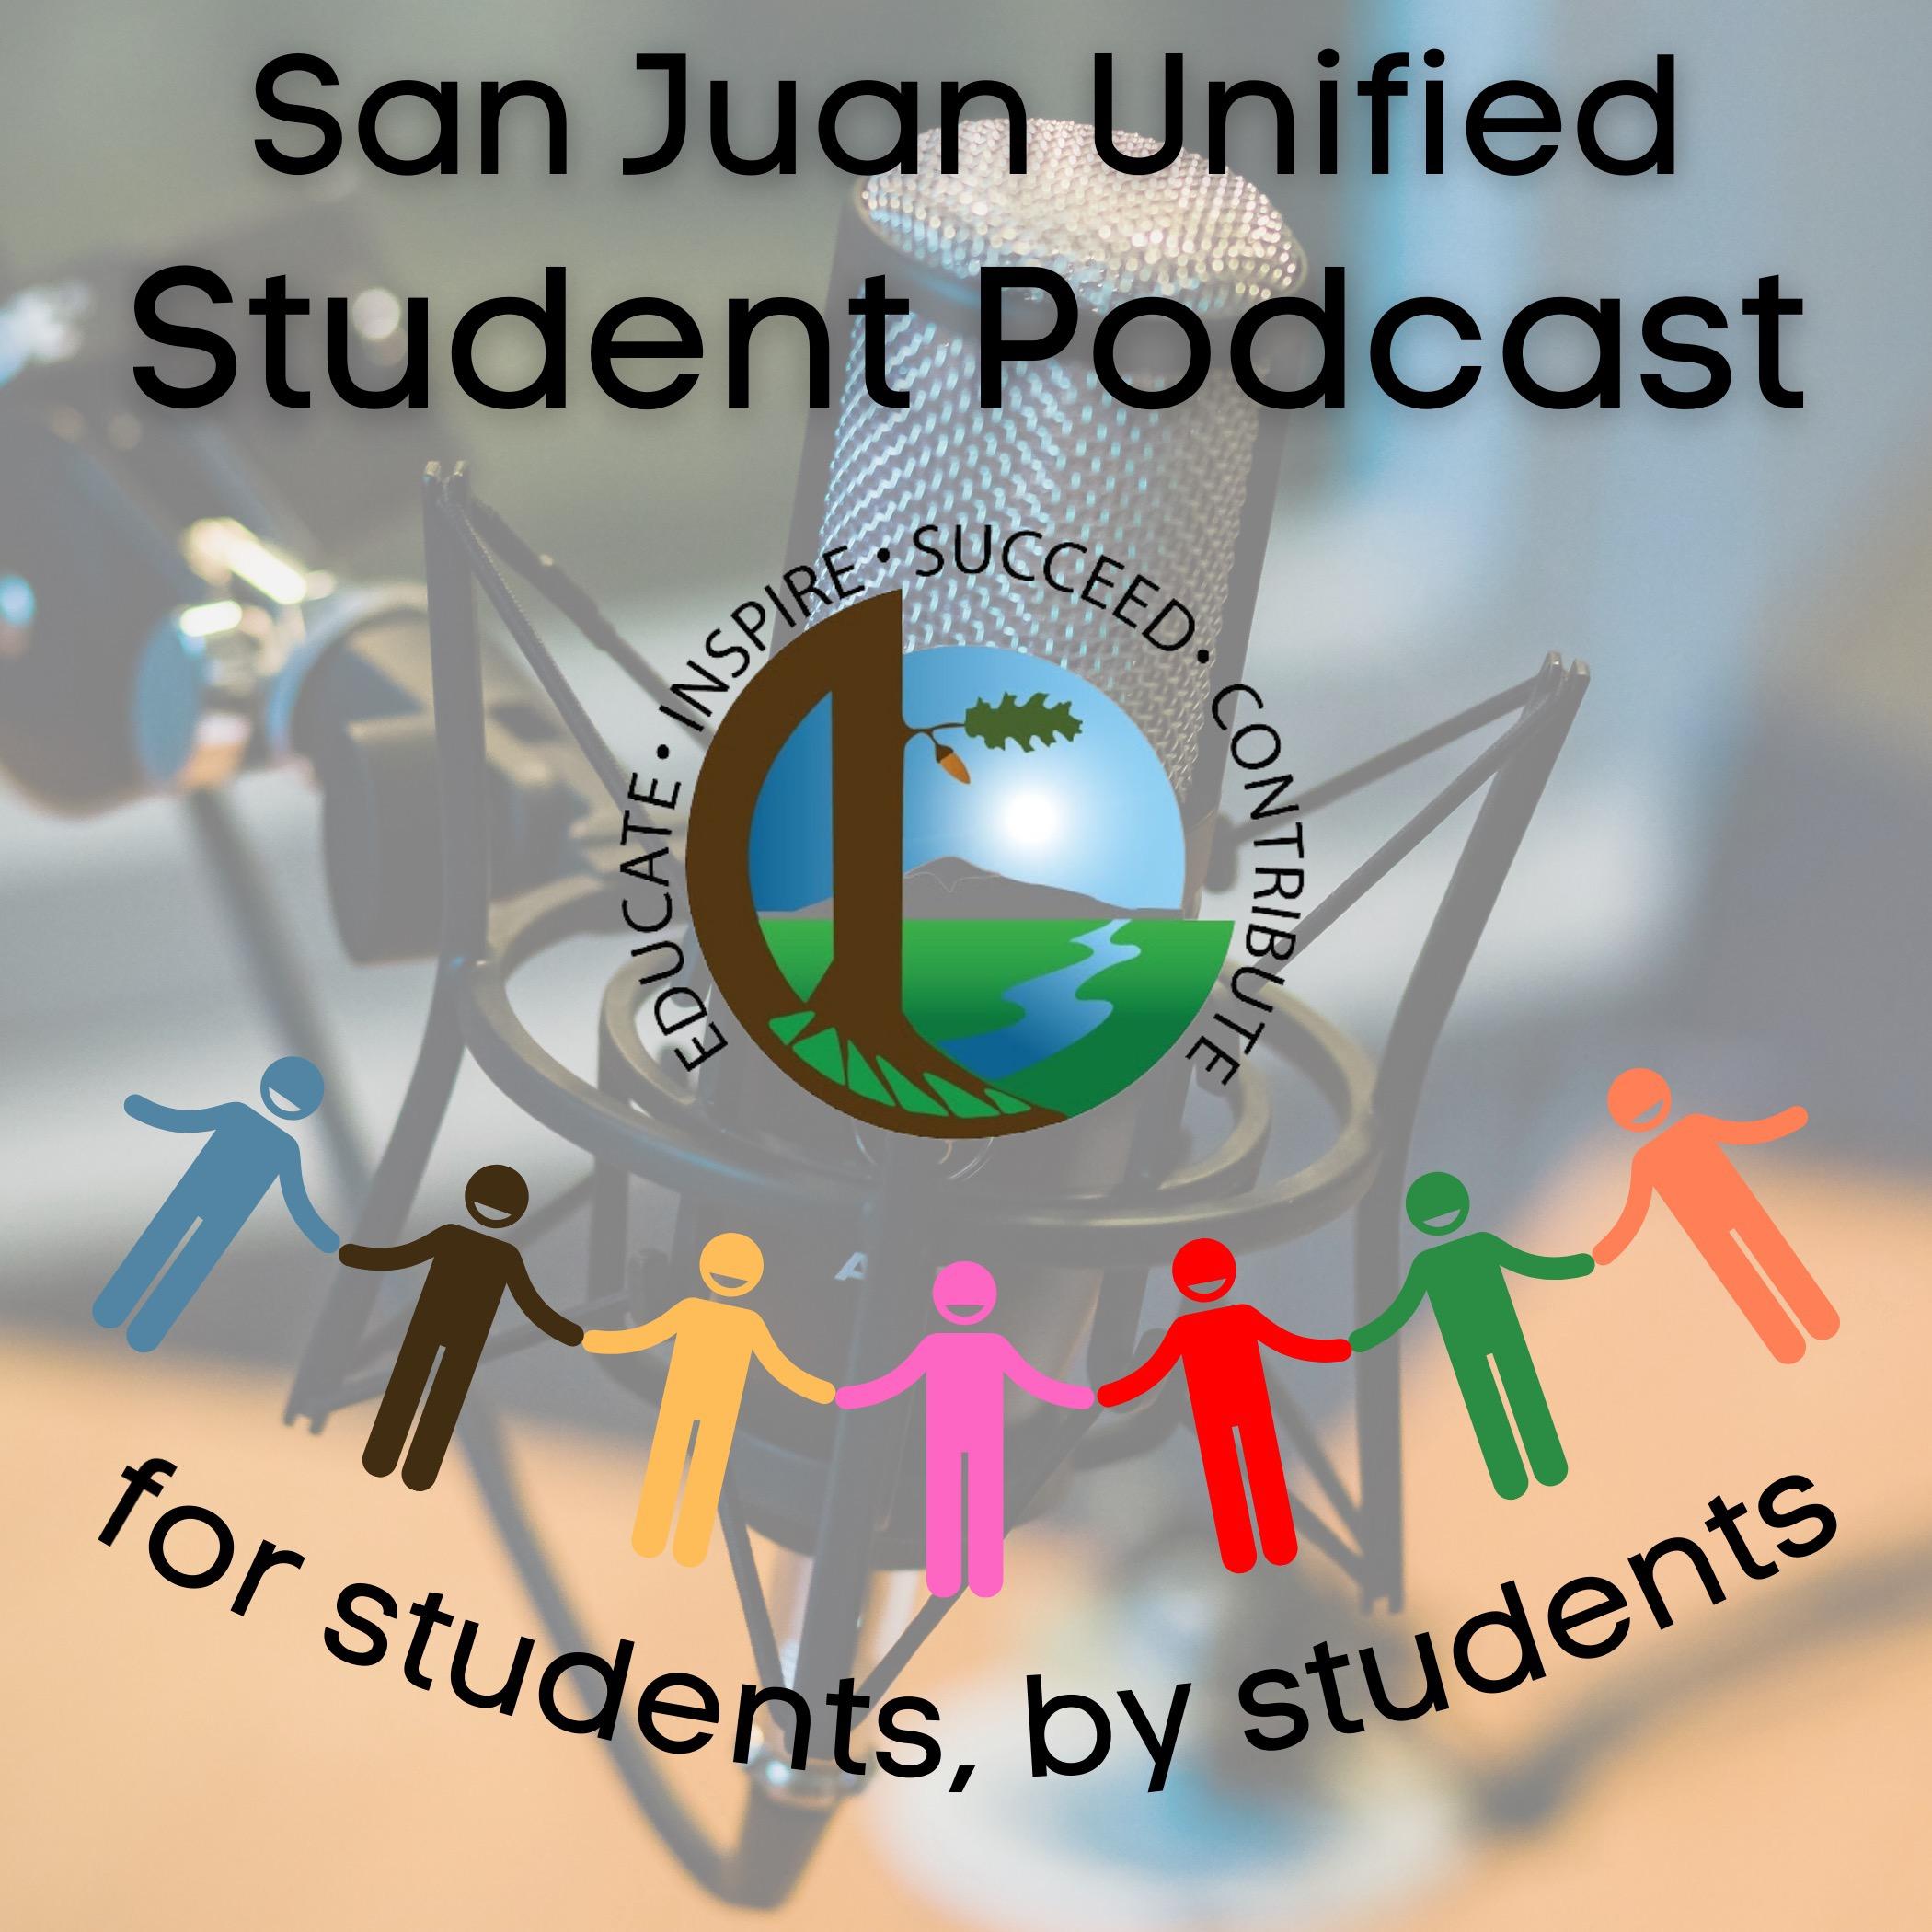 San Juan Unified Student Podcast